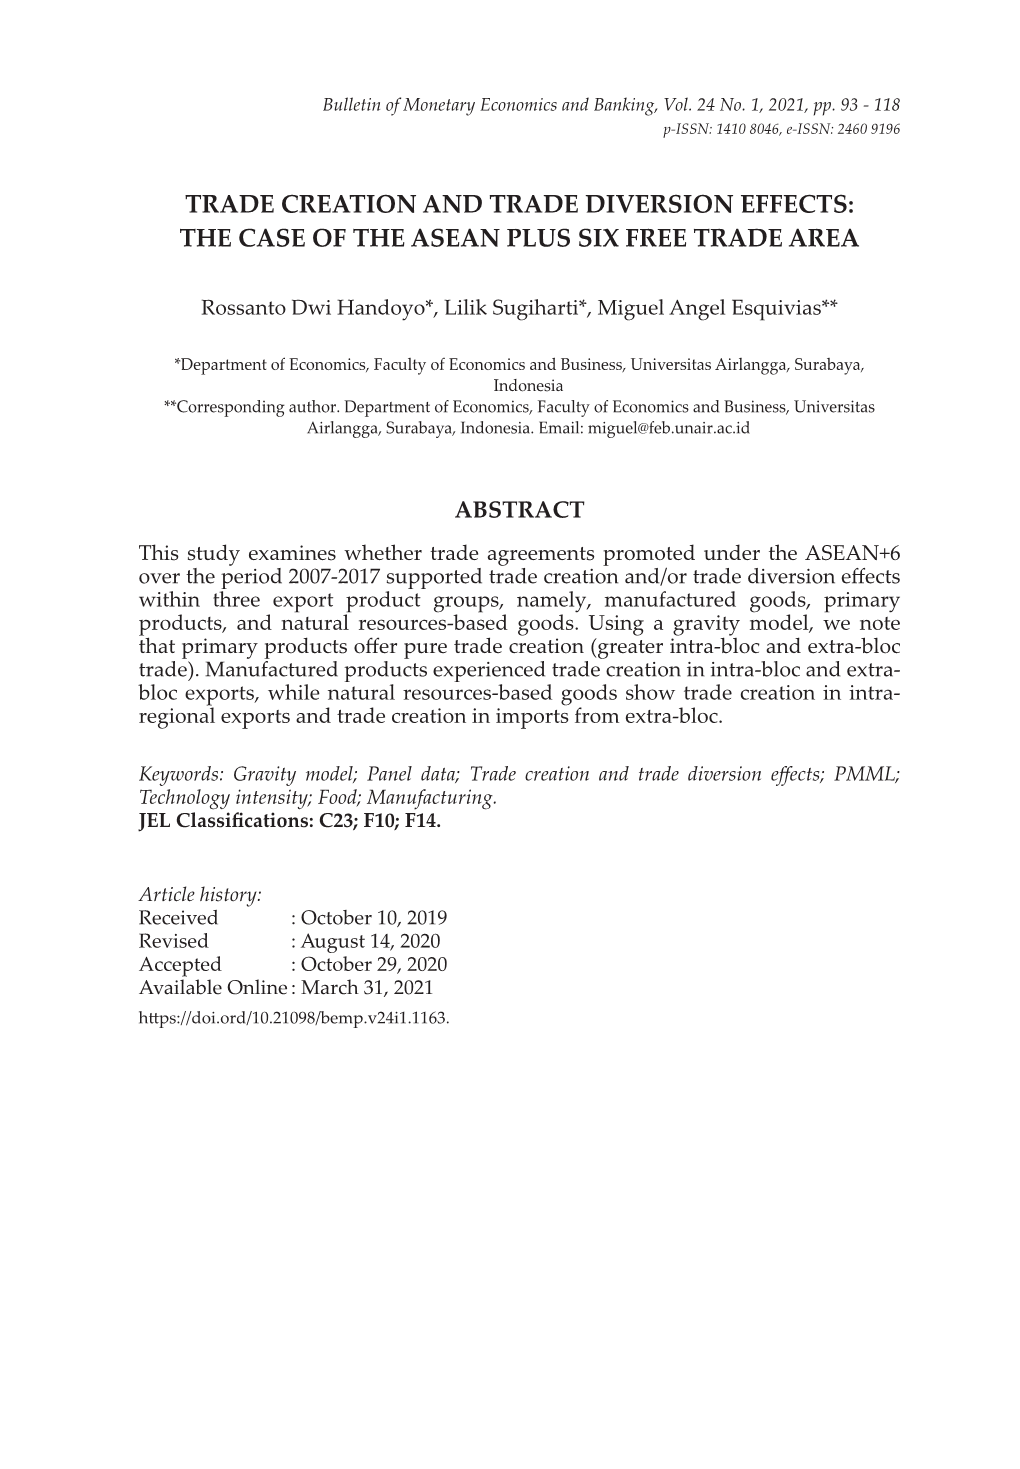 The Case of the Asean Plus Six Free Trade Area